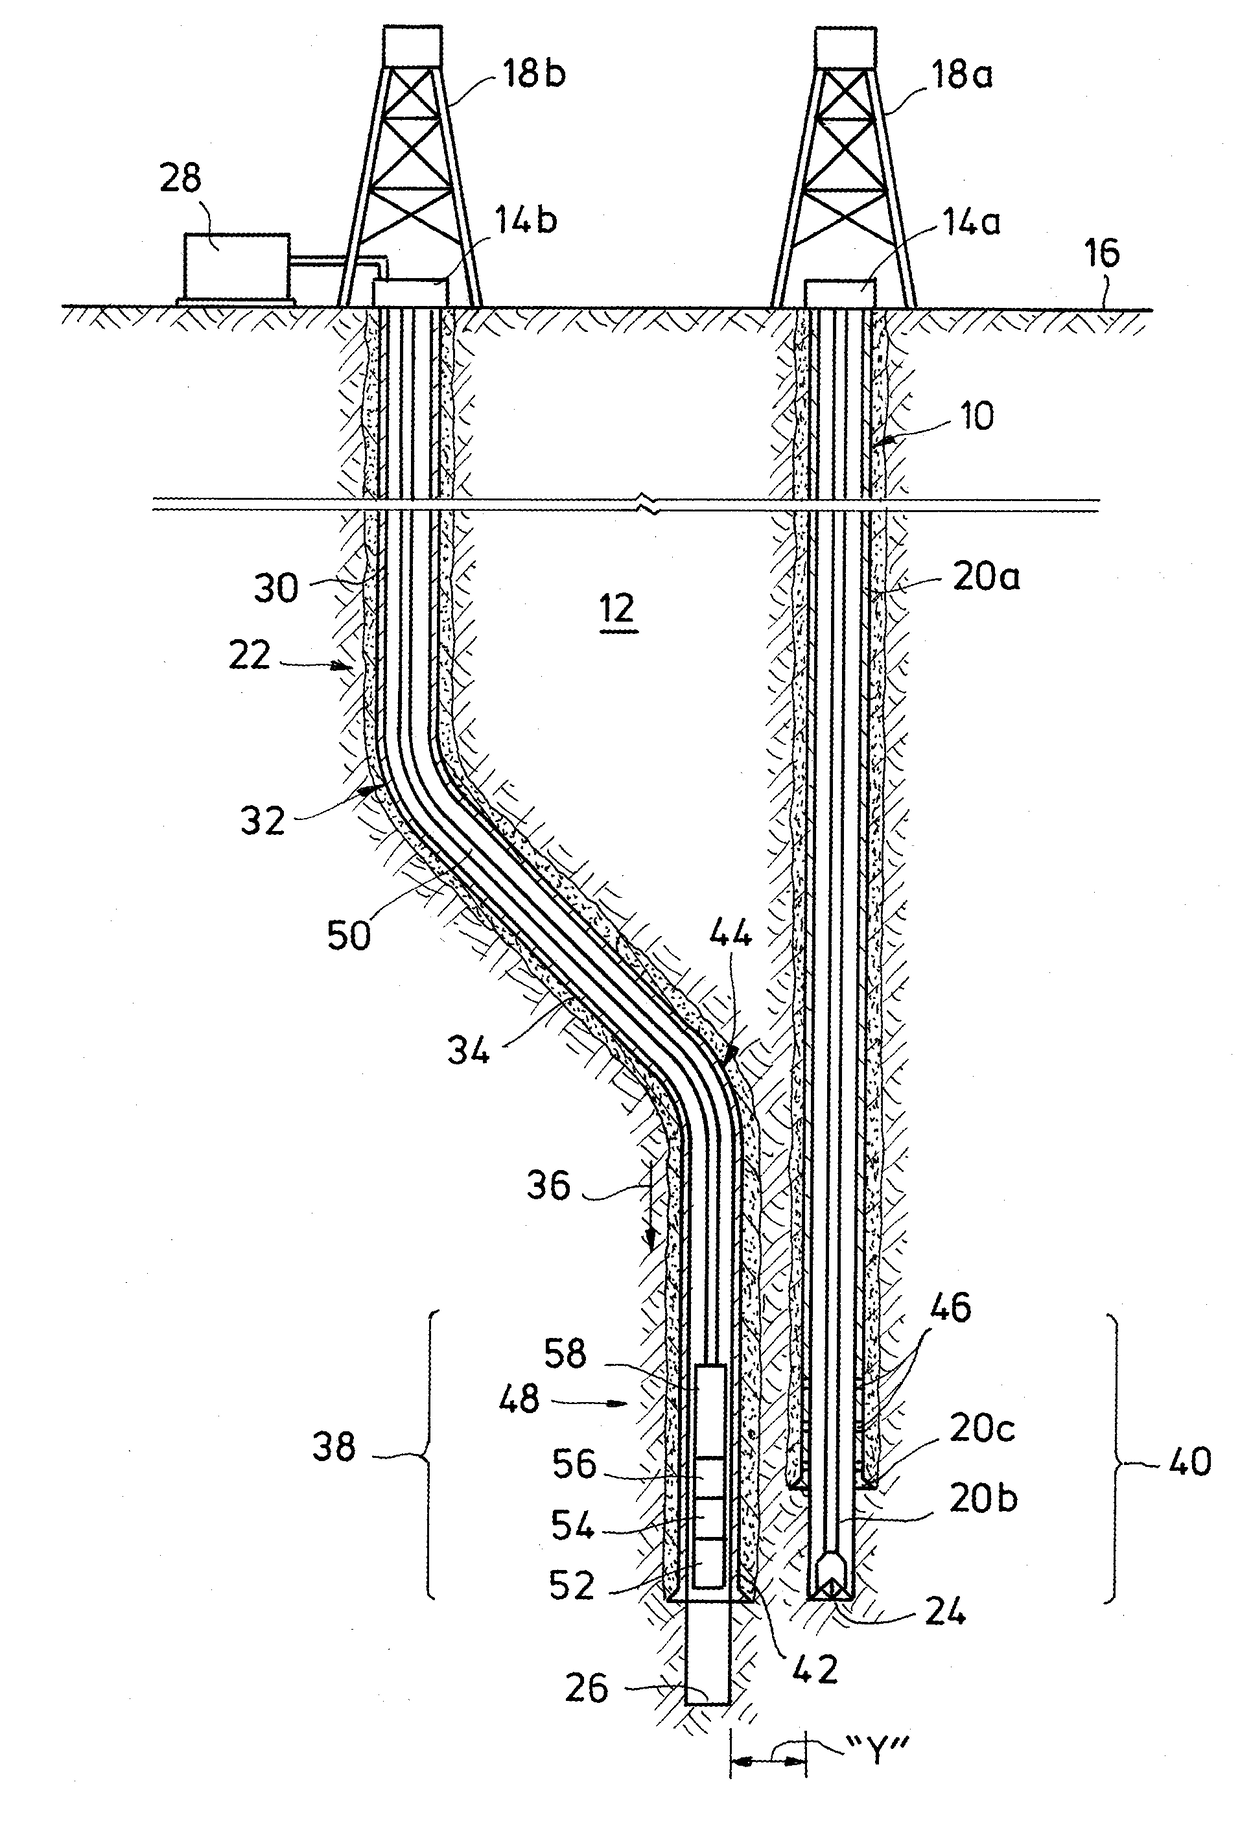 Method and System for Hydraulic Communication with Target Well from Relief Well